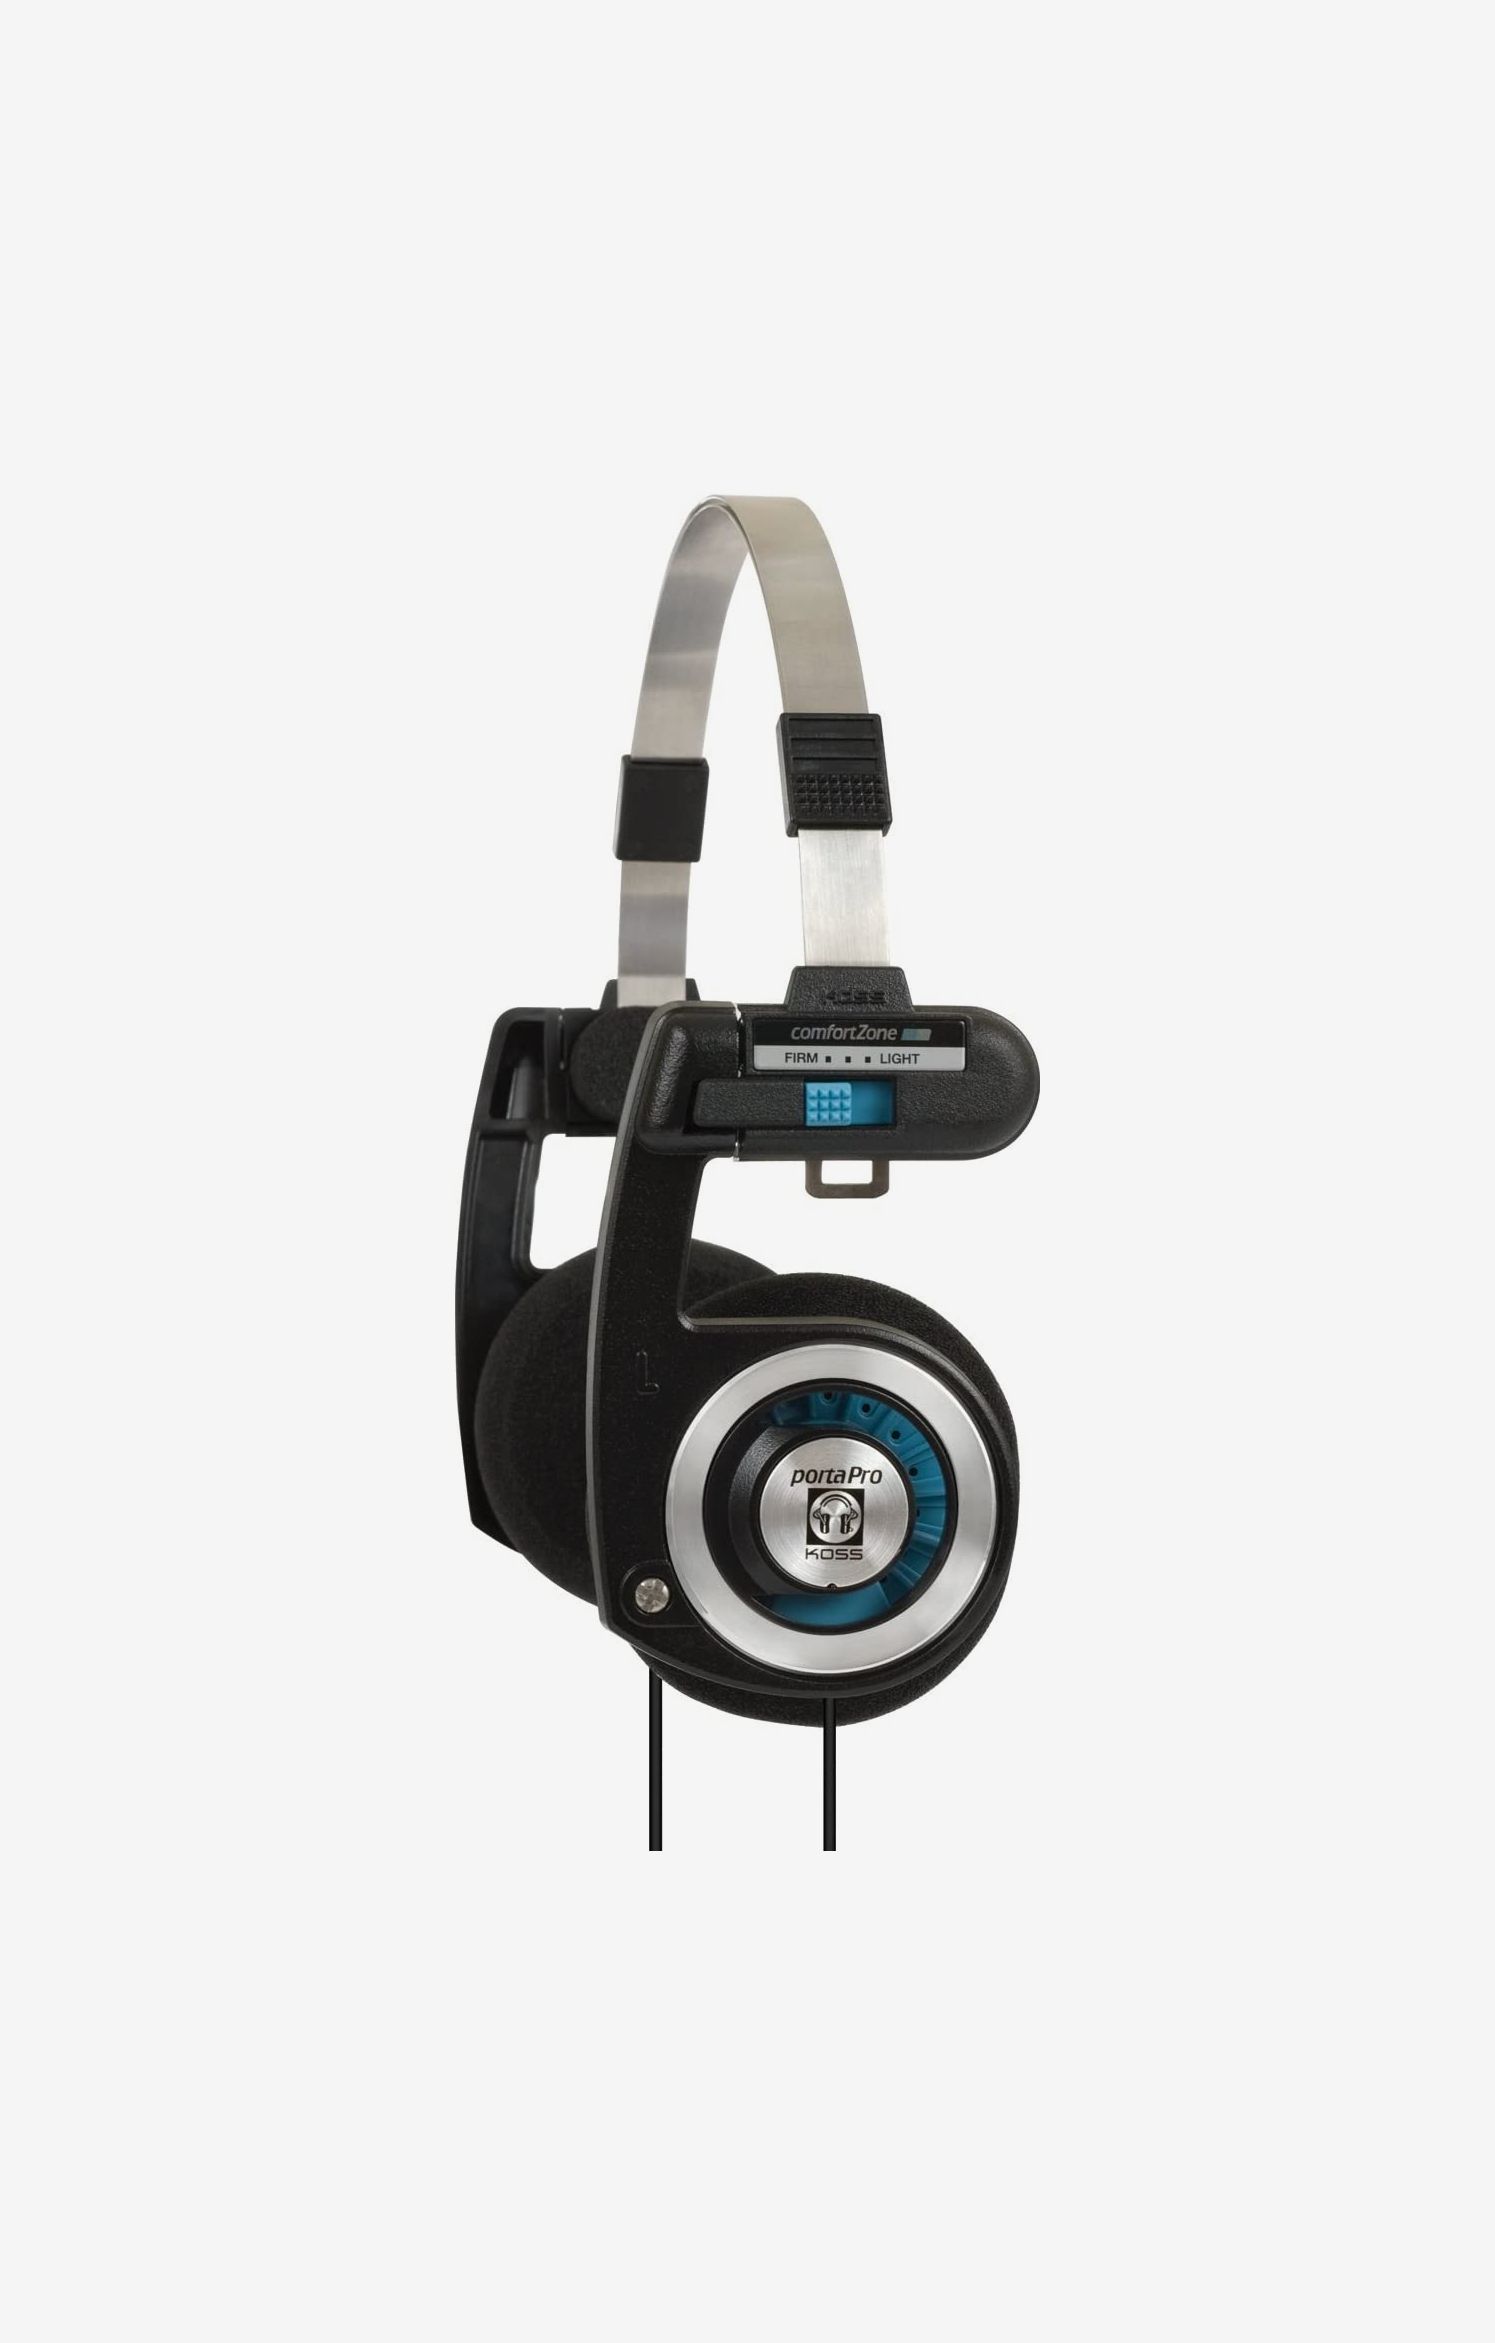 Koss Porta Pro Wireless  Headphone Reviews and Discussion 